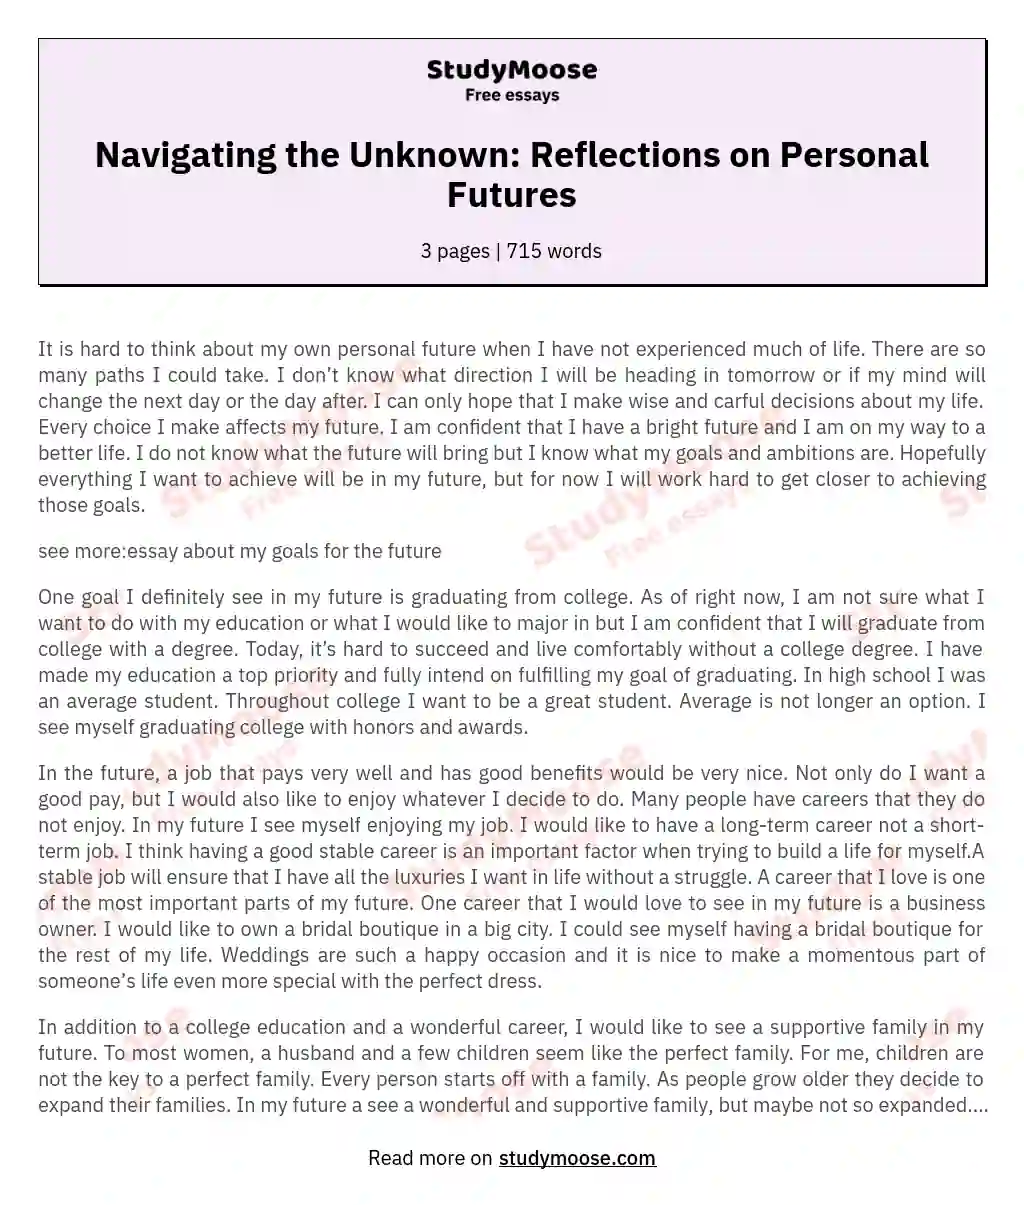 Navigating the Unknown: Reflections on Personal Futures essay